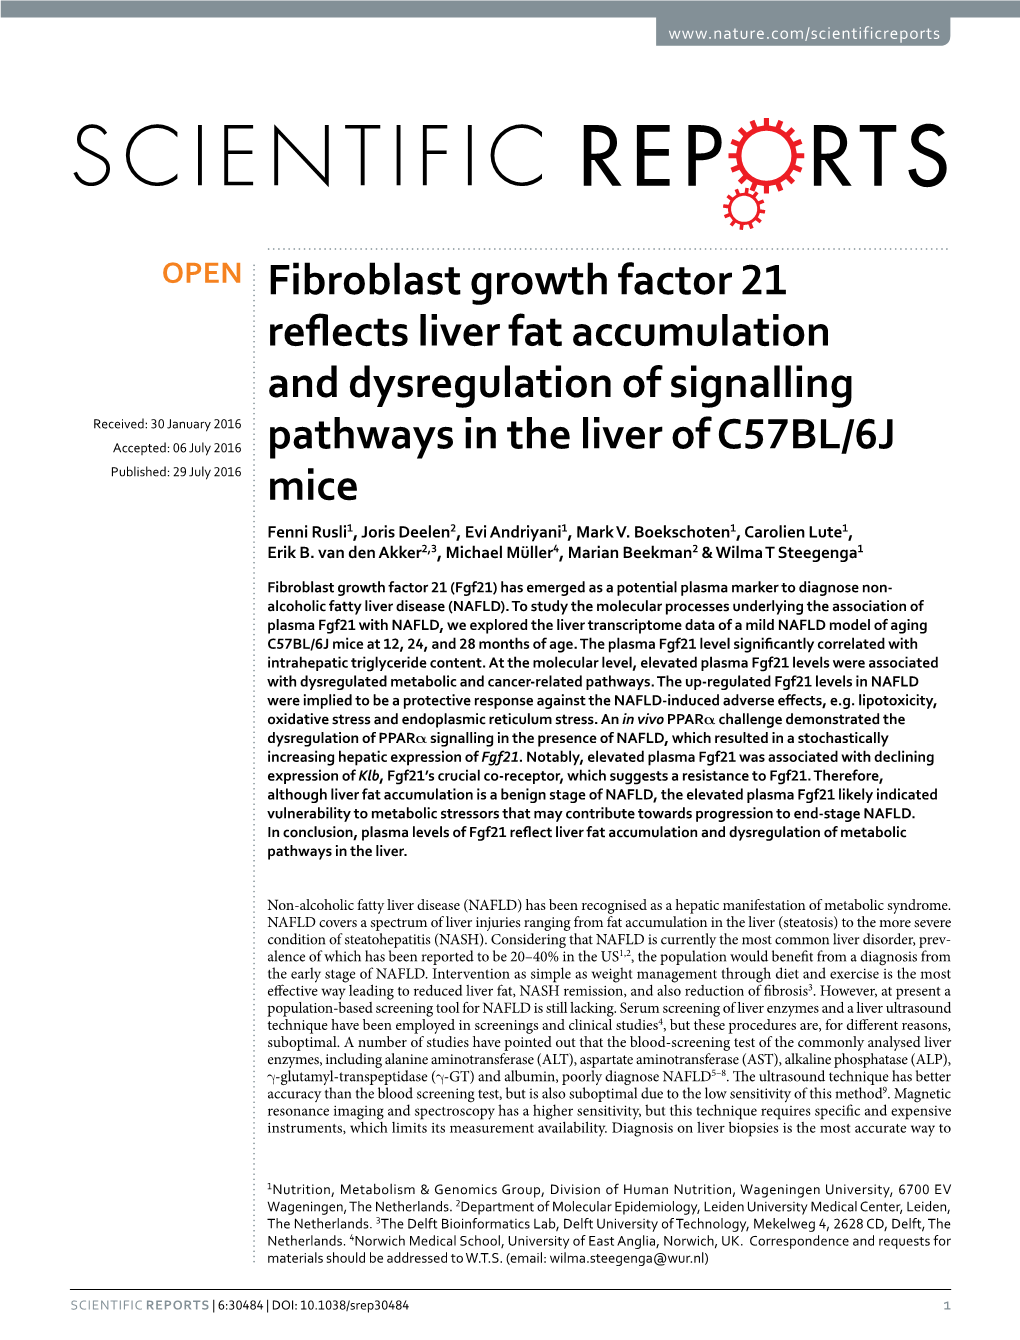 Fibroblast Growth Factor 21 Reflects Liver Fat Accumulation And